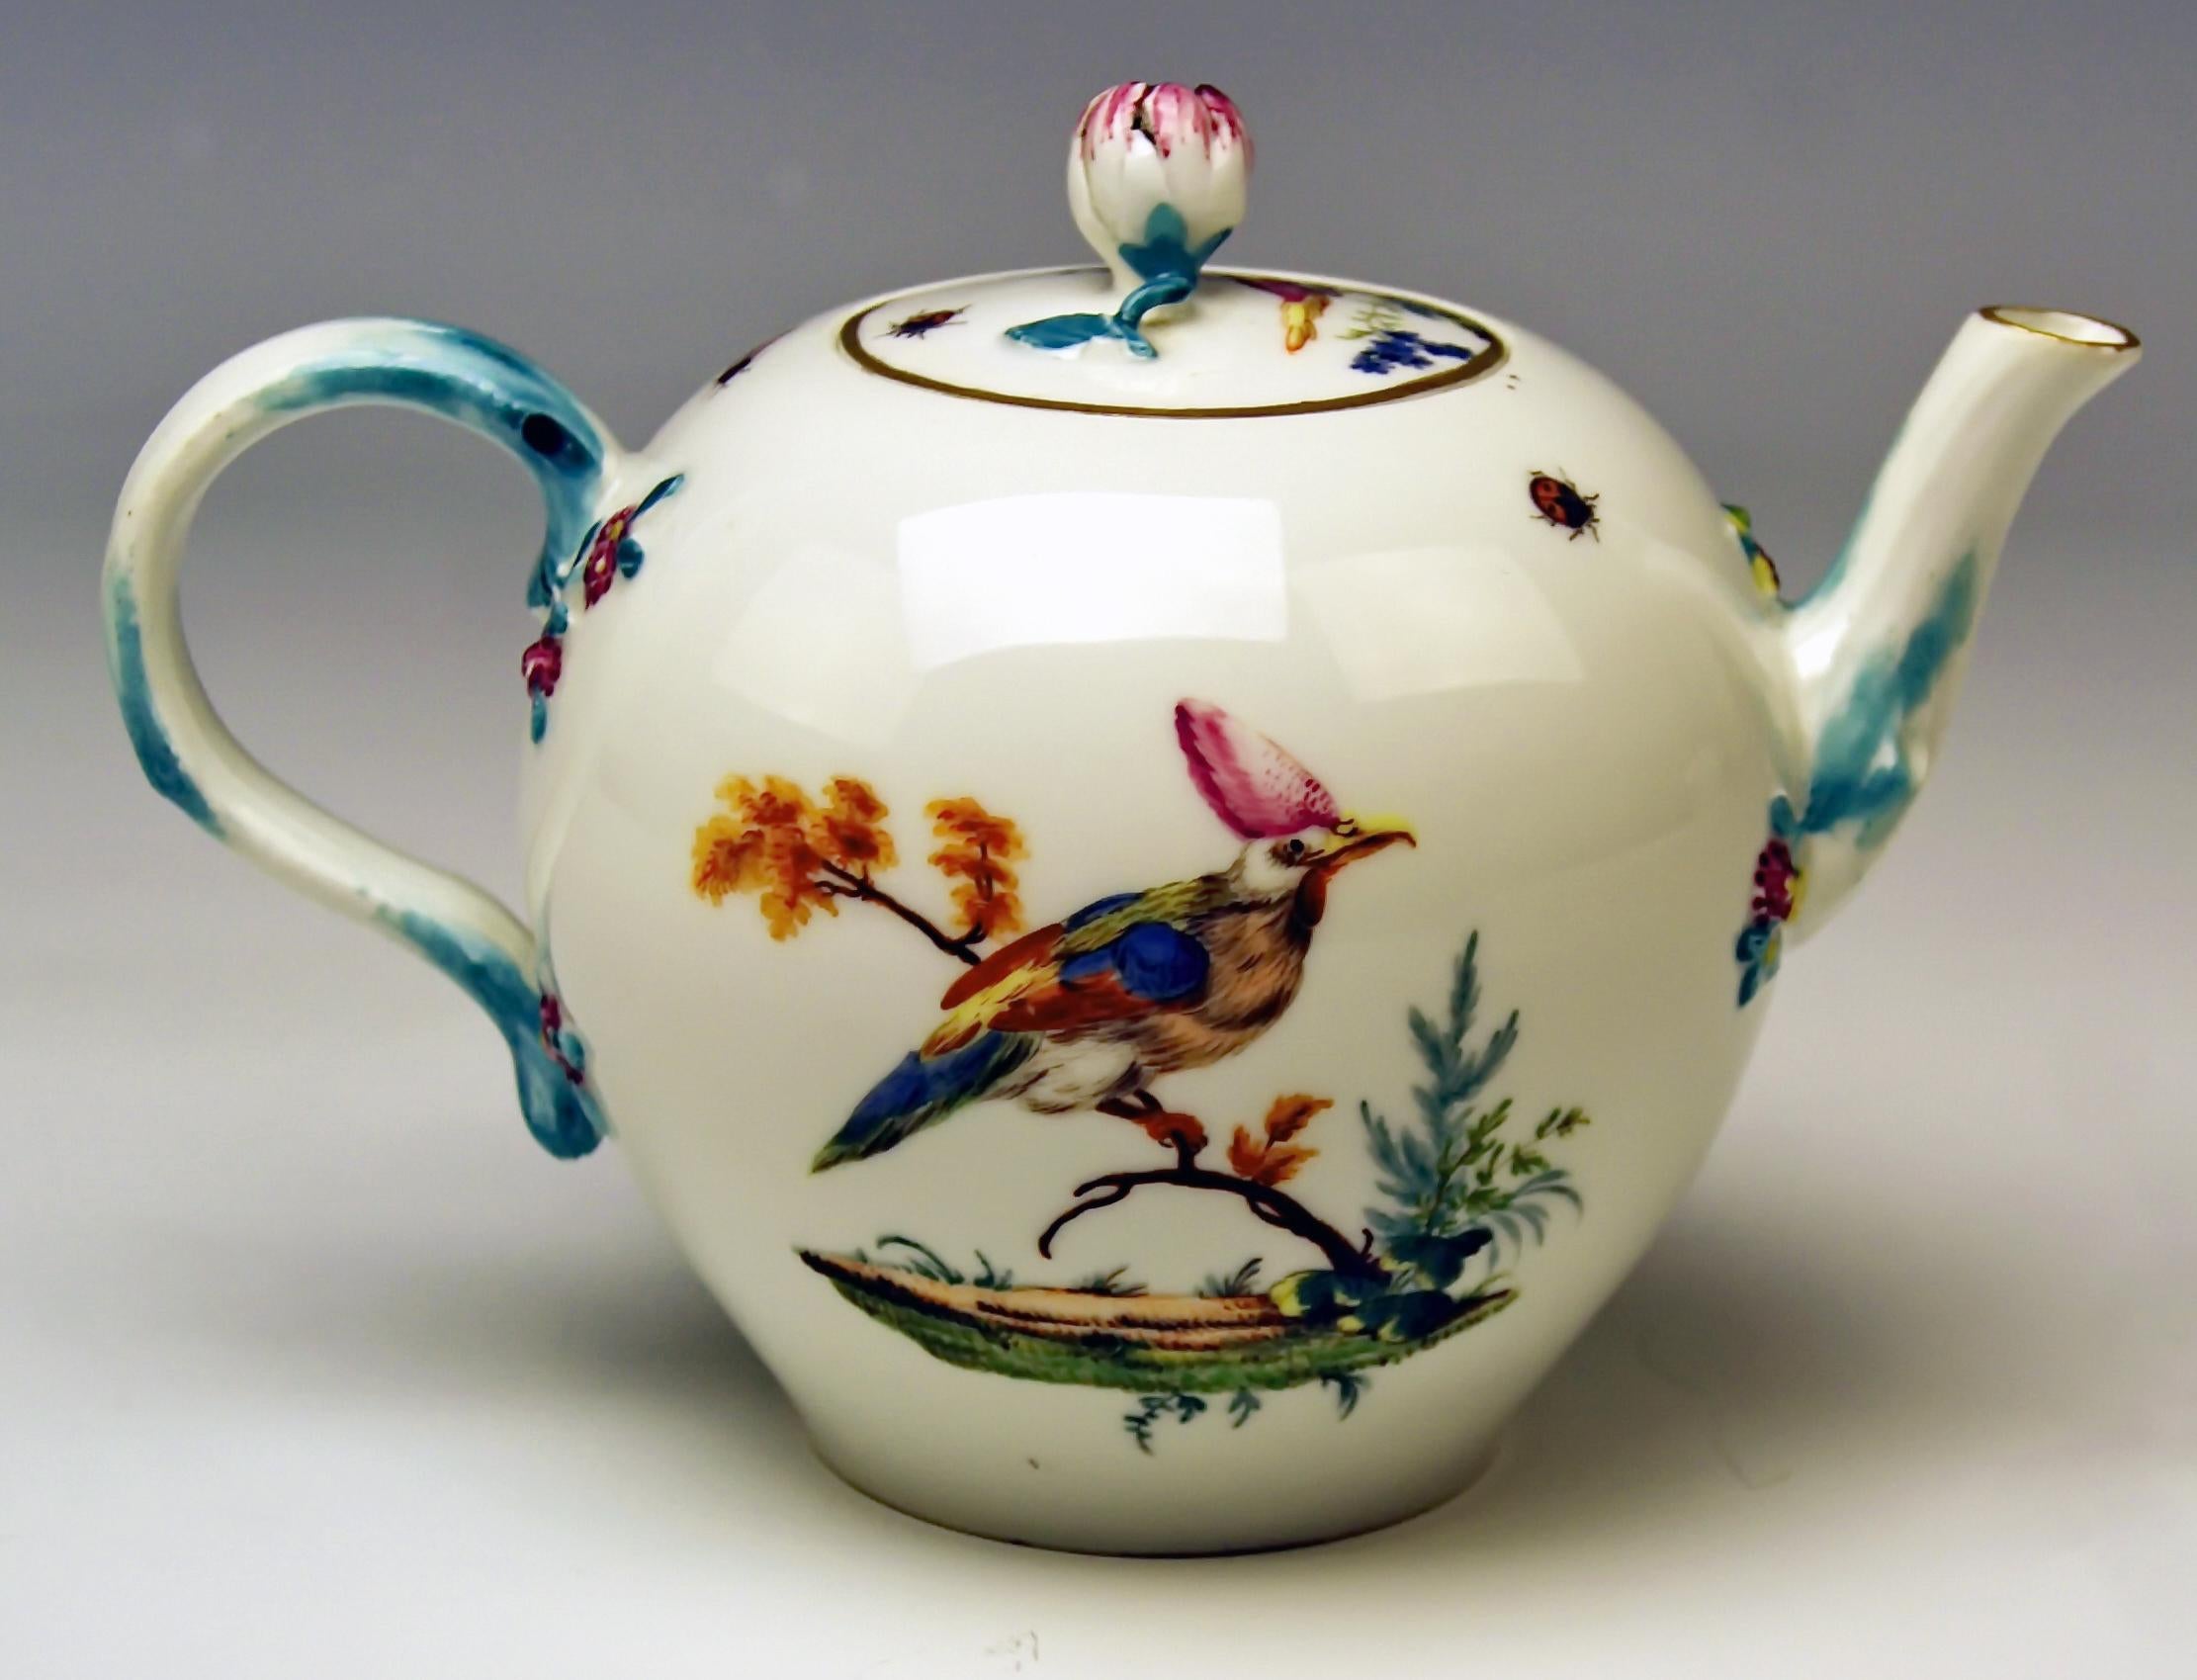 We invite you here to look at a splendid as well as rare Meissen lidded tea pot:
It is made of white porcelain / multicolored paintings consist of various birds' figurines of very special specimen (= multicolored feathers) / these birds sit on leafy